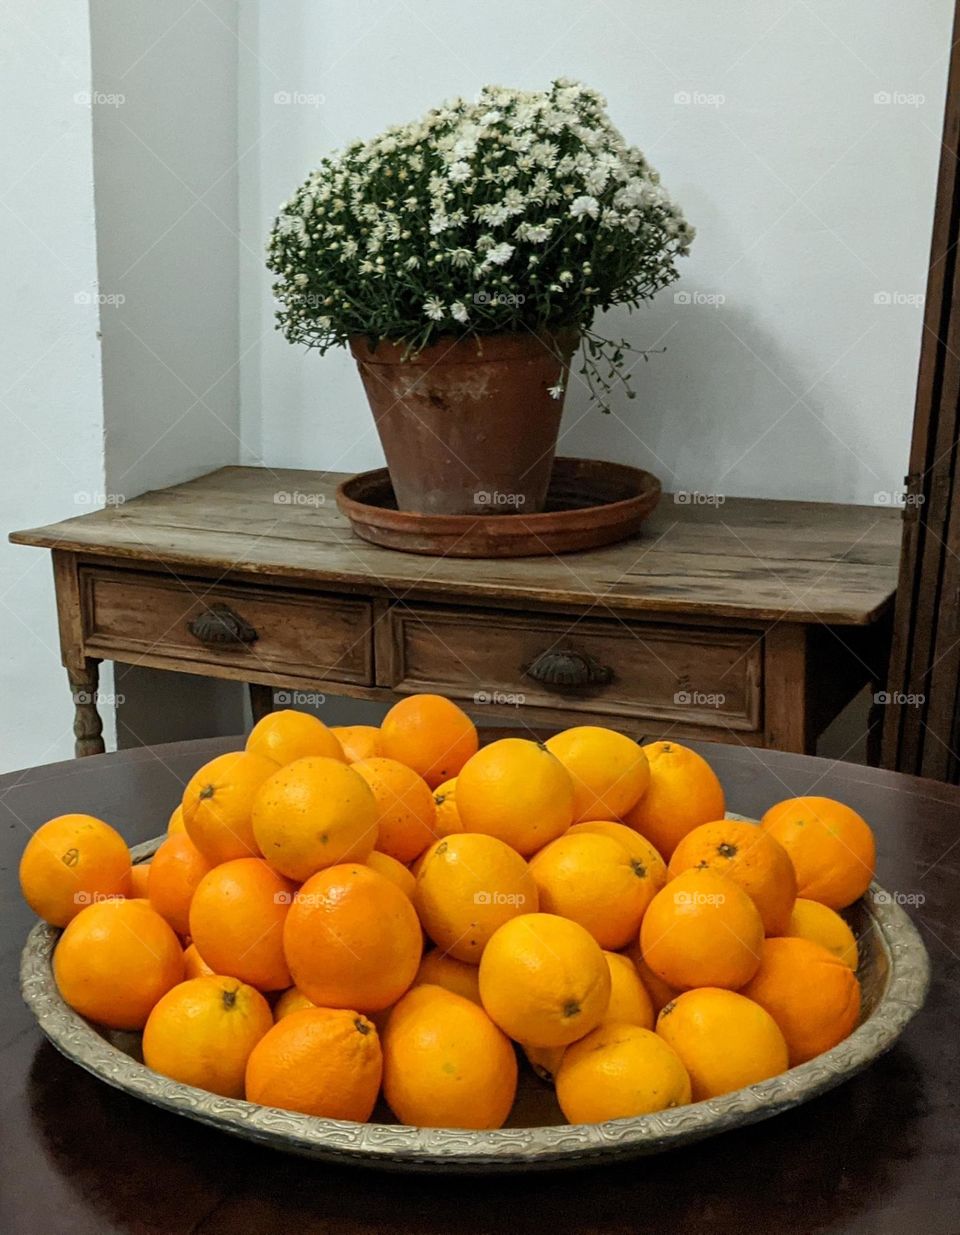 whole lot off oranges in a bowl